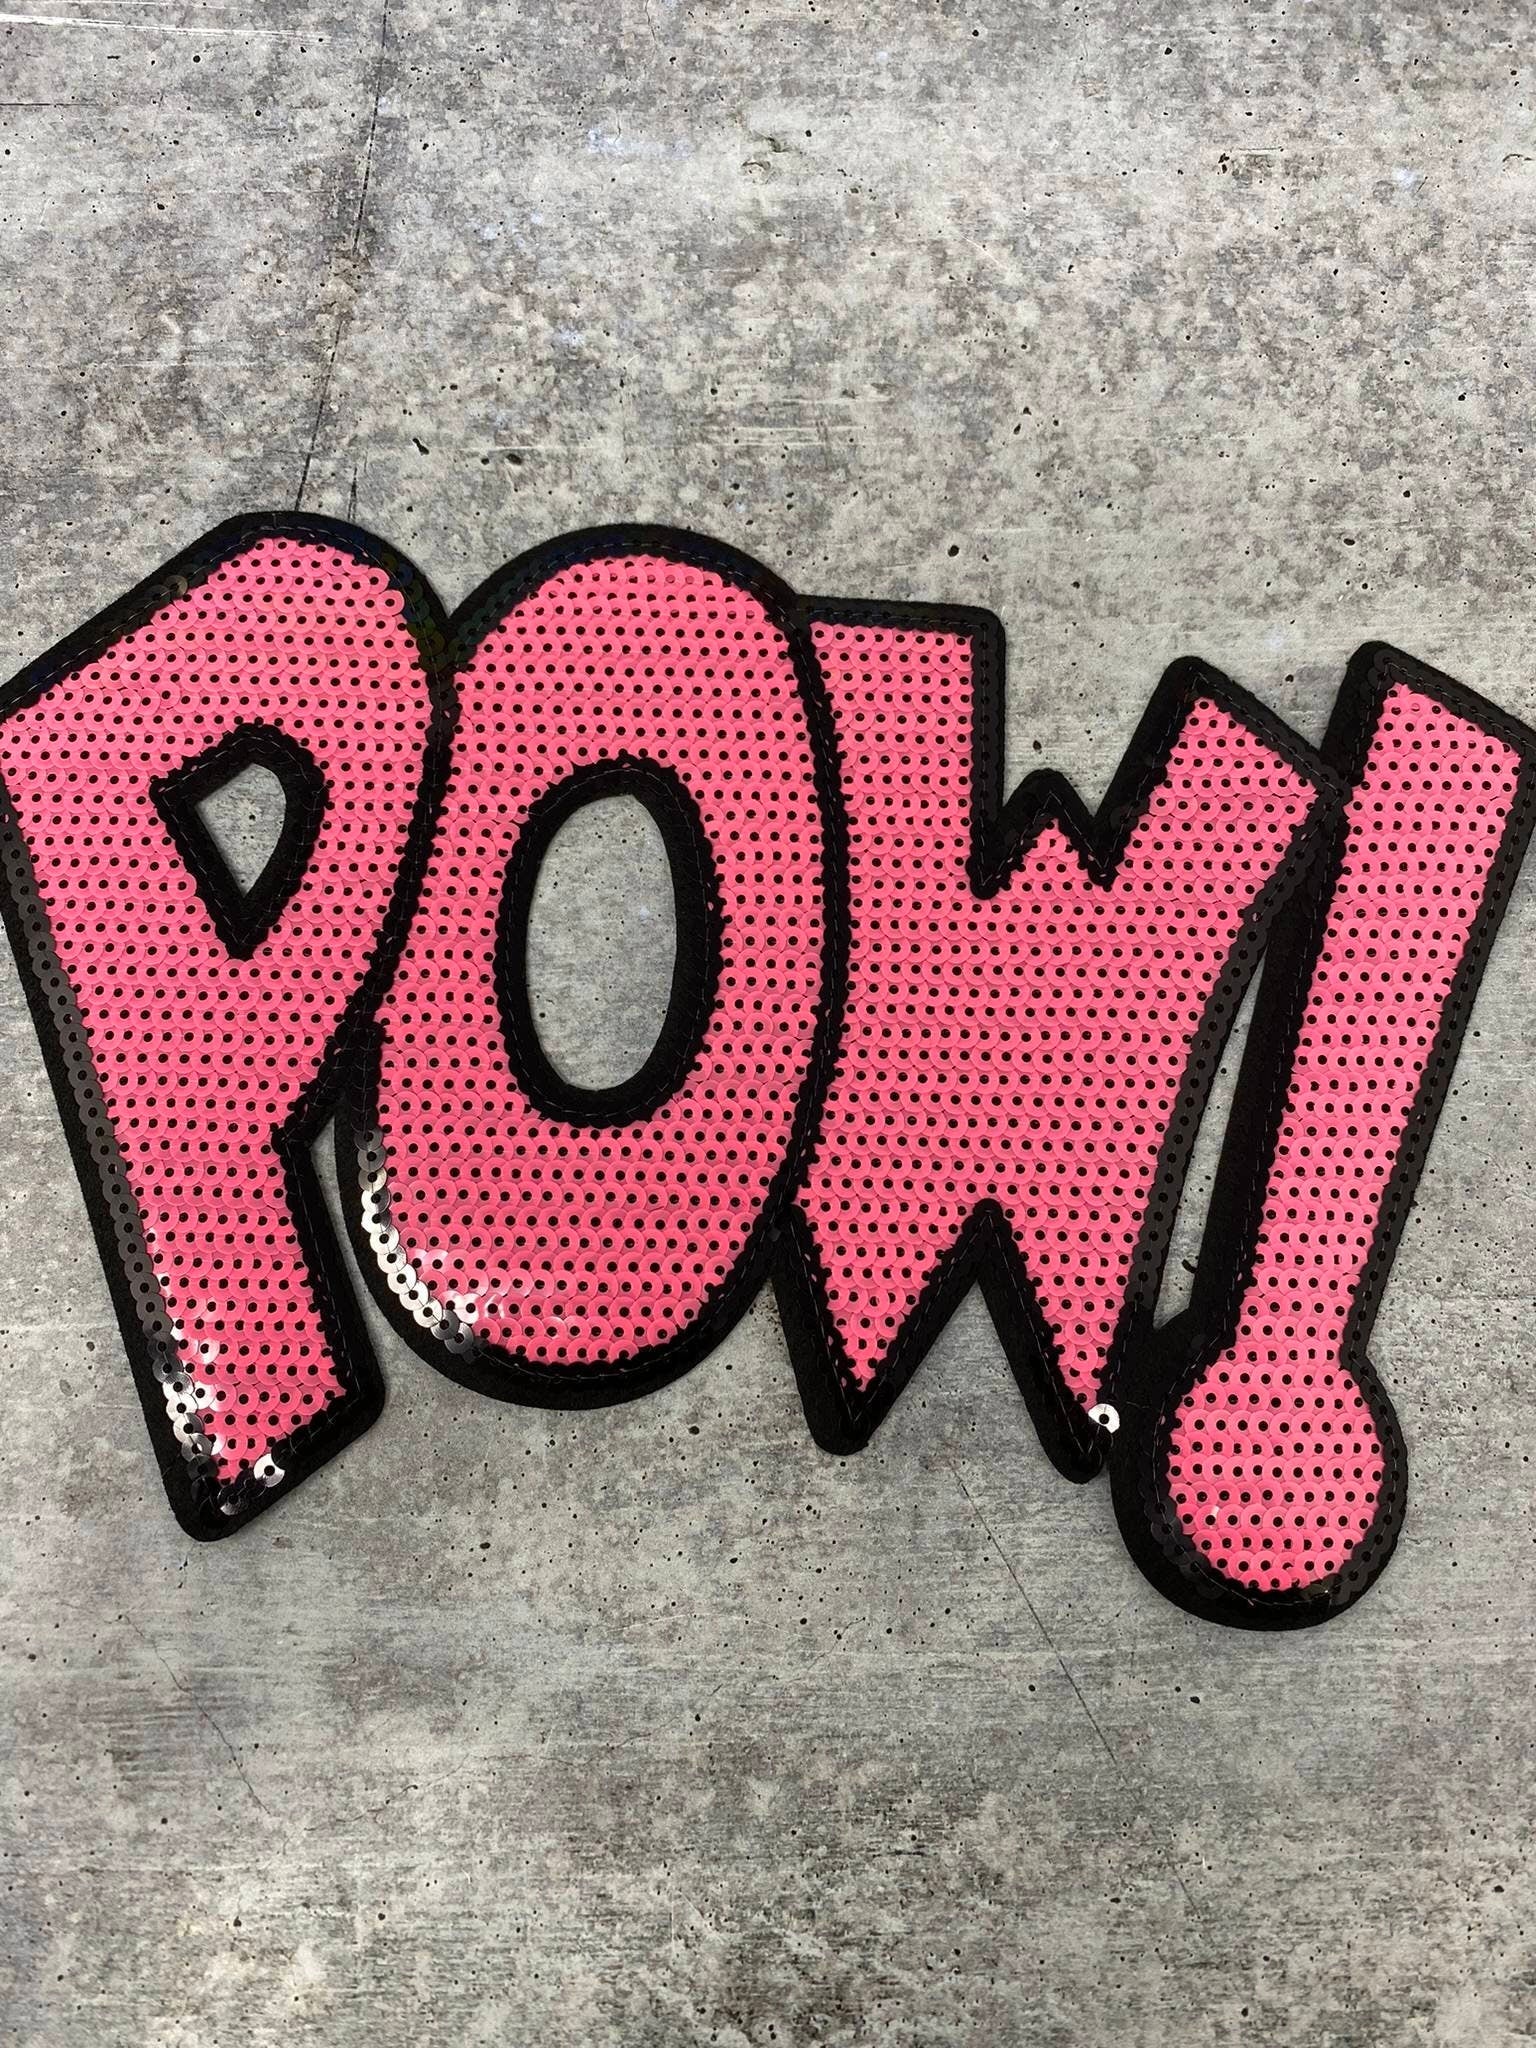 NEW, Pink "POW!" Sequins Sparkling Patch, Large Applique, Statement Patch, Iron-on, Size 10"x6", DIY Jacket, Varsity Jacket, Camo, Hoodie